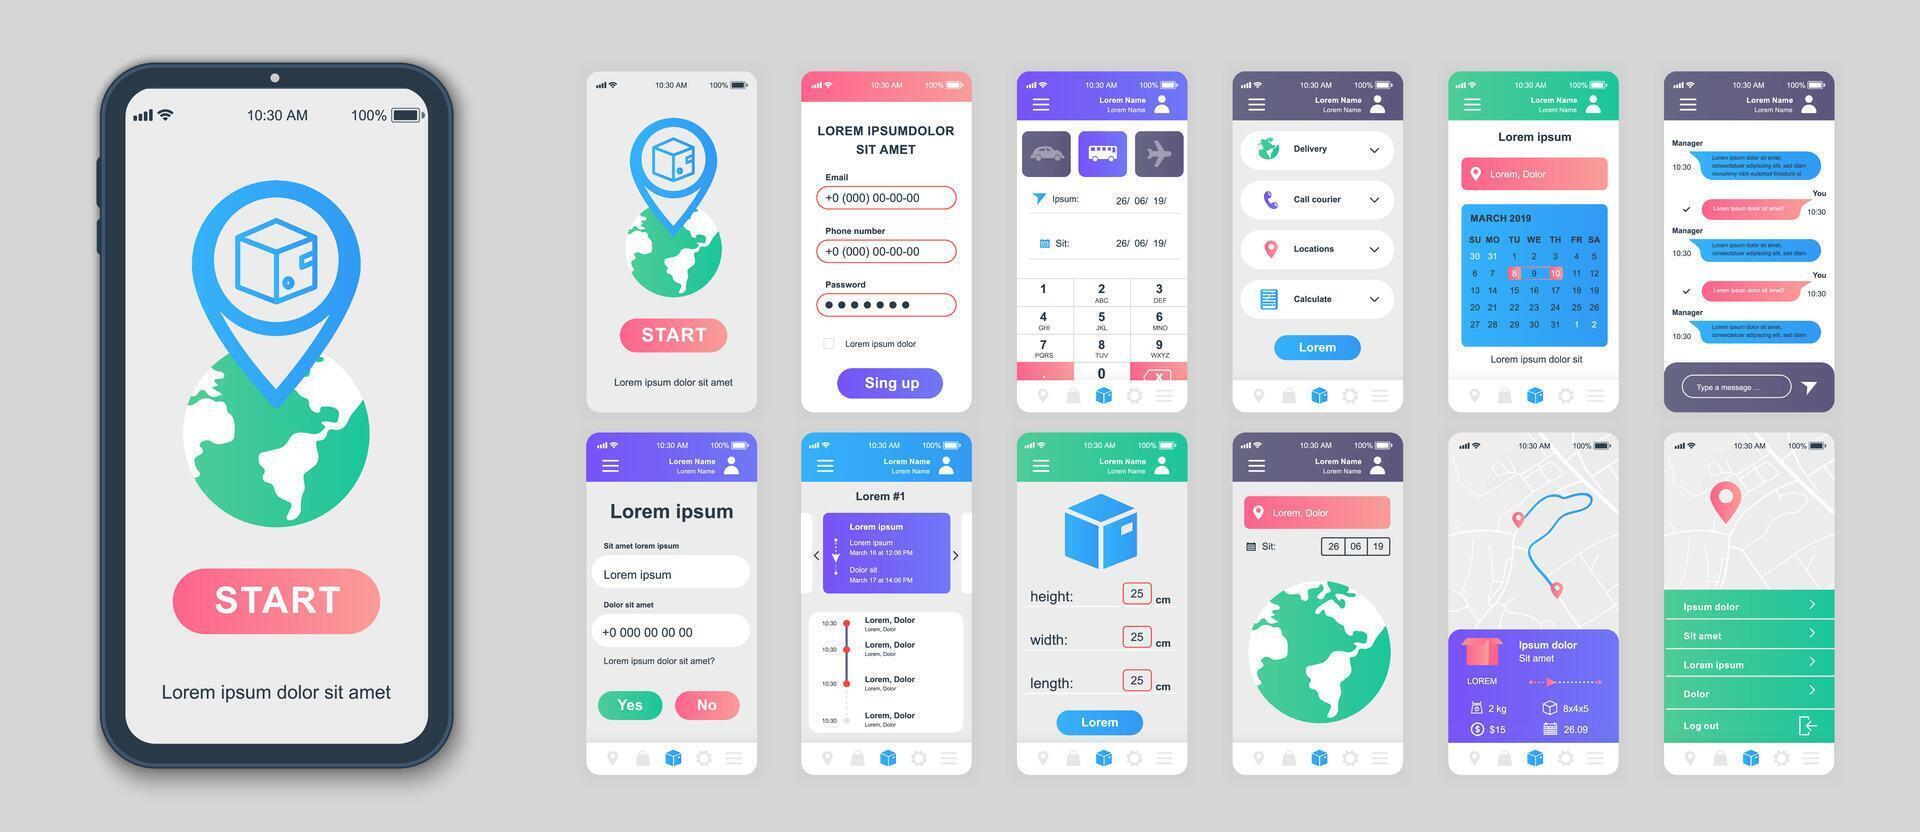 Delivery mobile app screens set for web templates. Pack of global logistic service, tracking parcel, calendar, calculate package. UI, UX, GUI user interface kit for cellphone layouts. Vector design